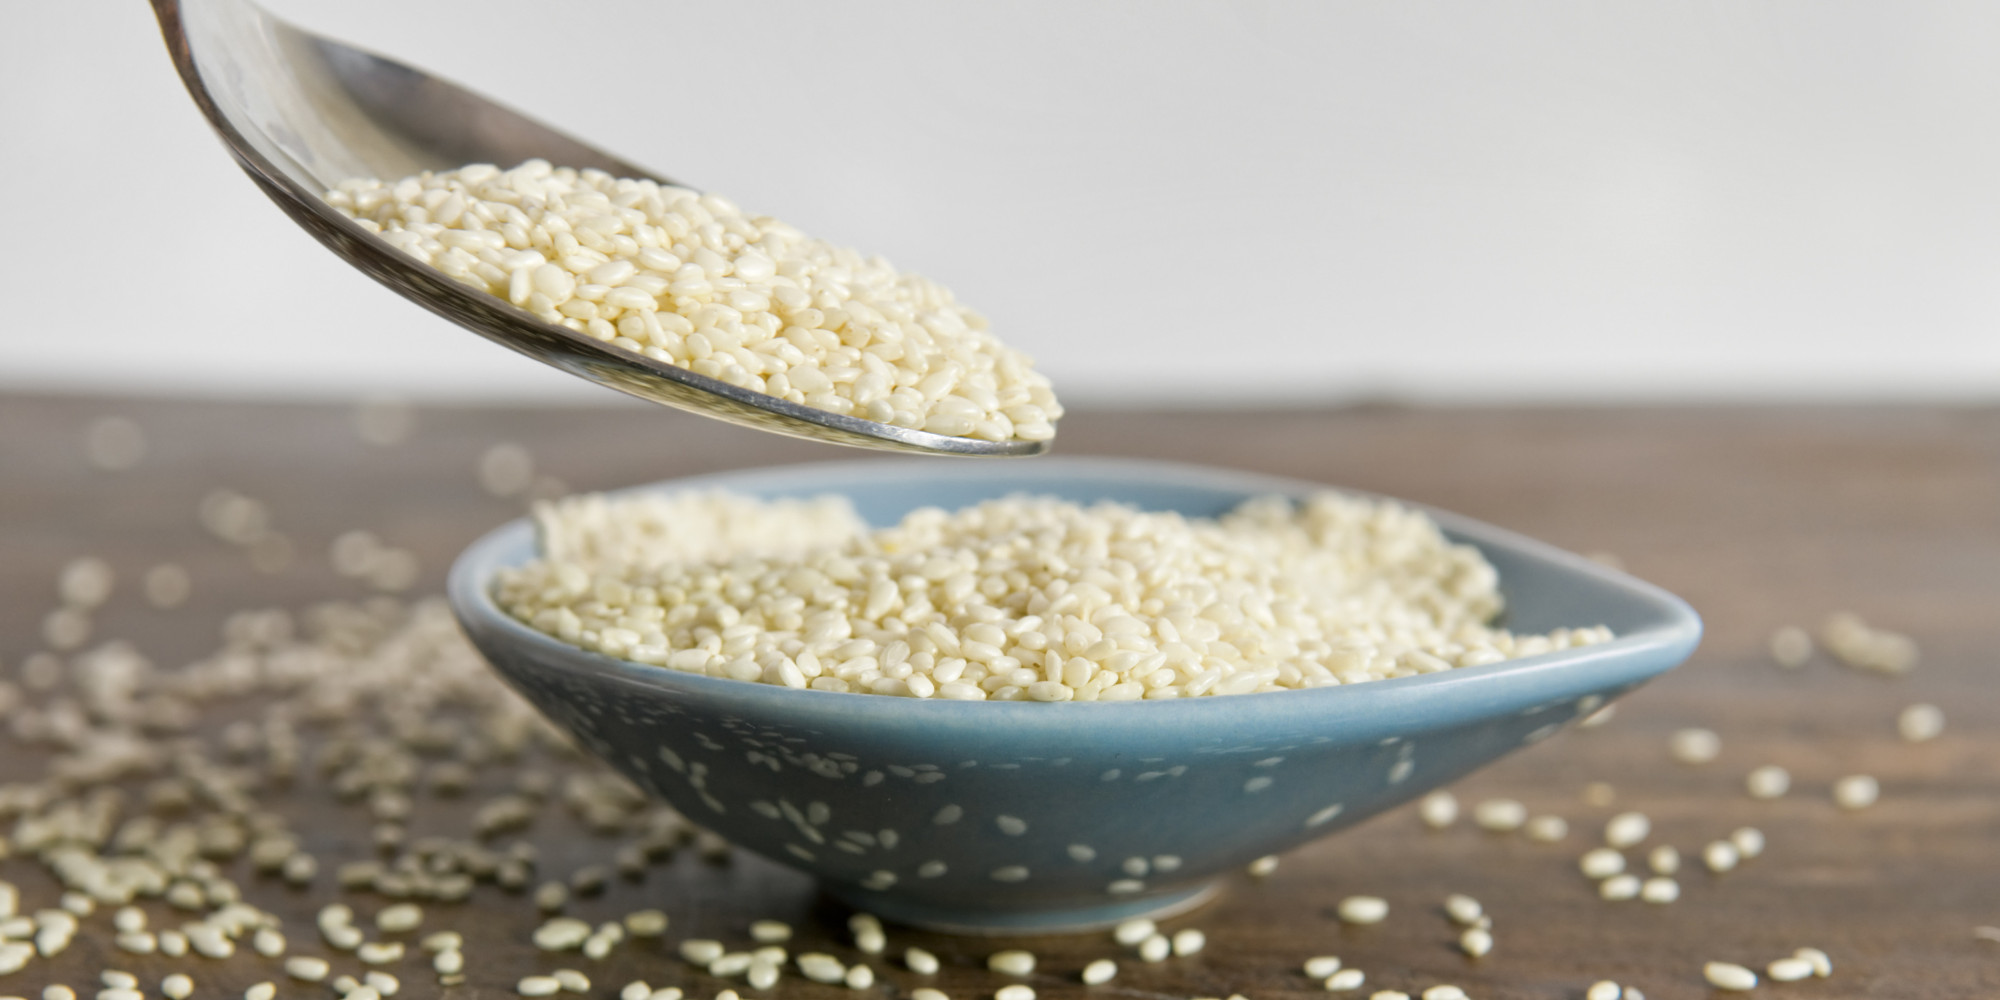 Compelling research concludes sesame seed paste can reduce the risk of cardiovascular disease by 39% in only 6 weeks